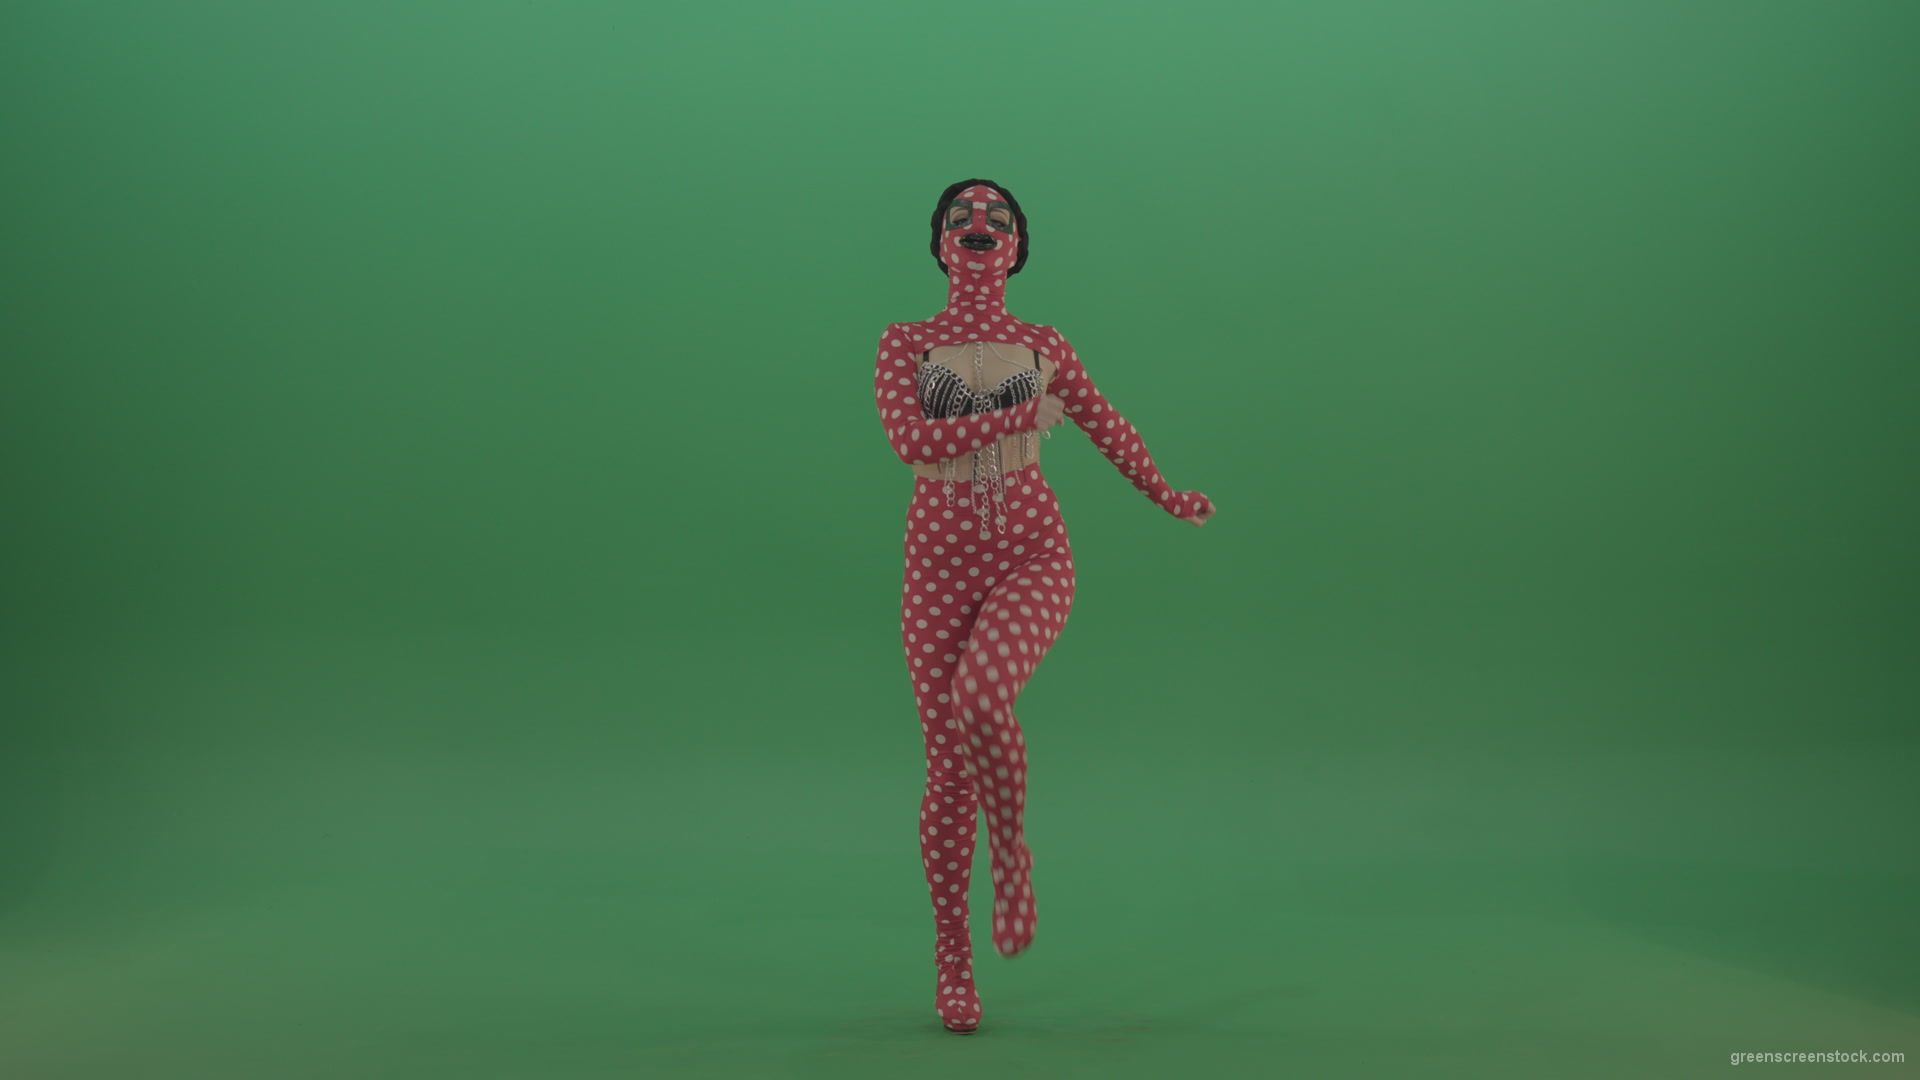 Beauty-red-dress-girl-march-in-front-view-isolated-on-green-screen_005 Green Screen Stock